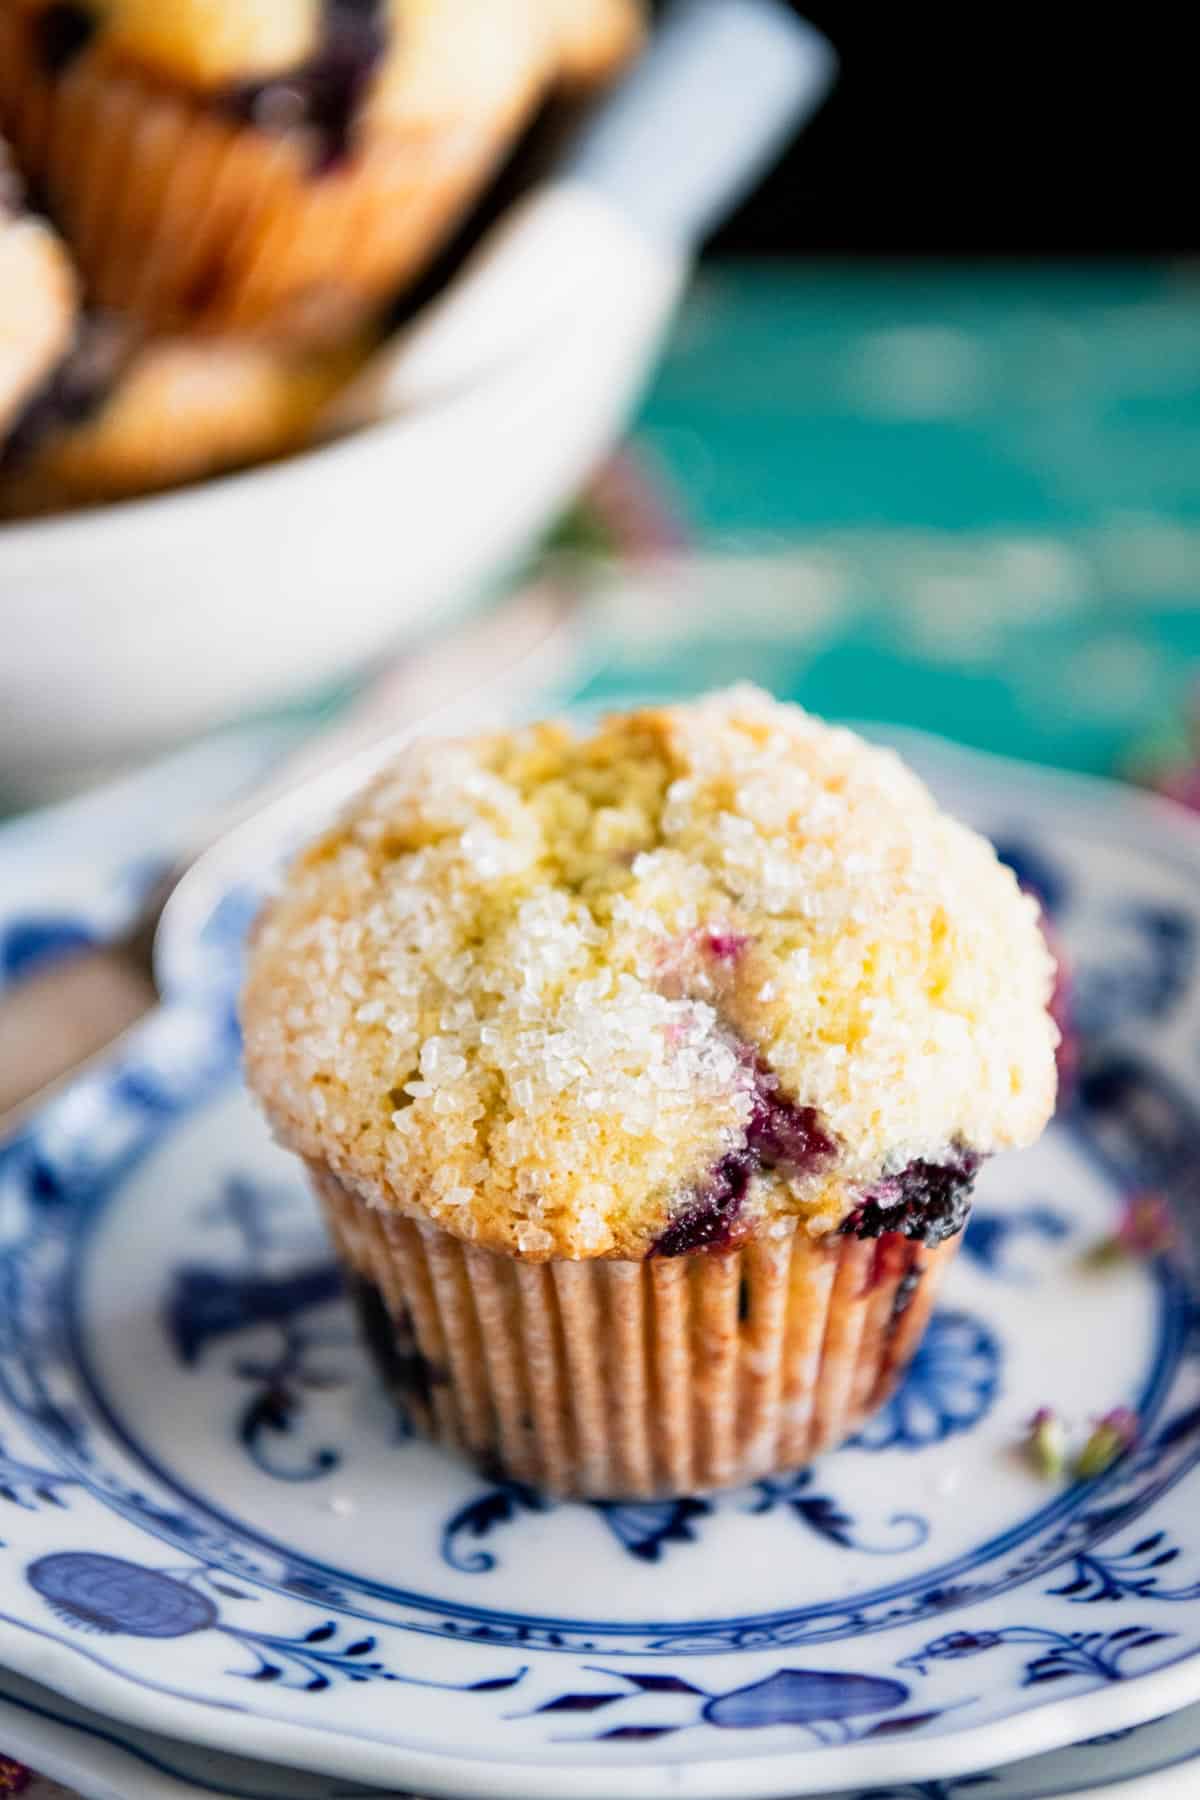 Sour cream blueberry muffin on a small blue and white plate.